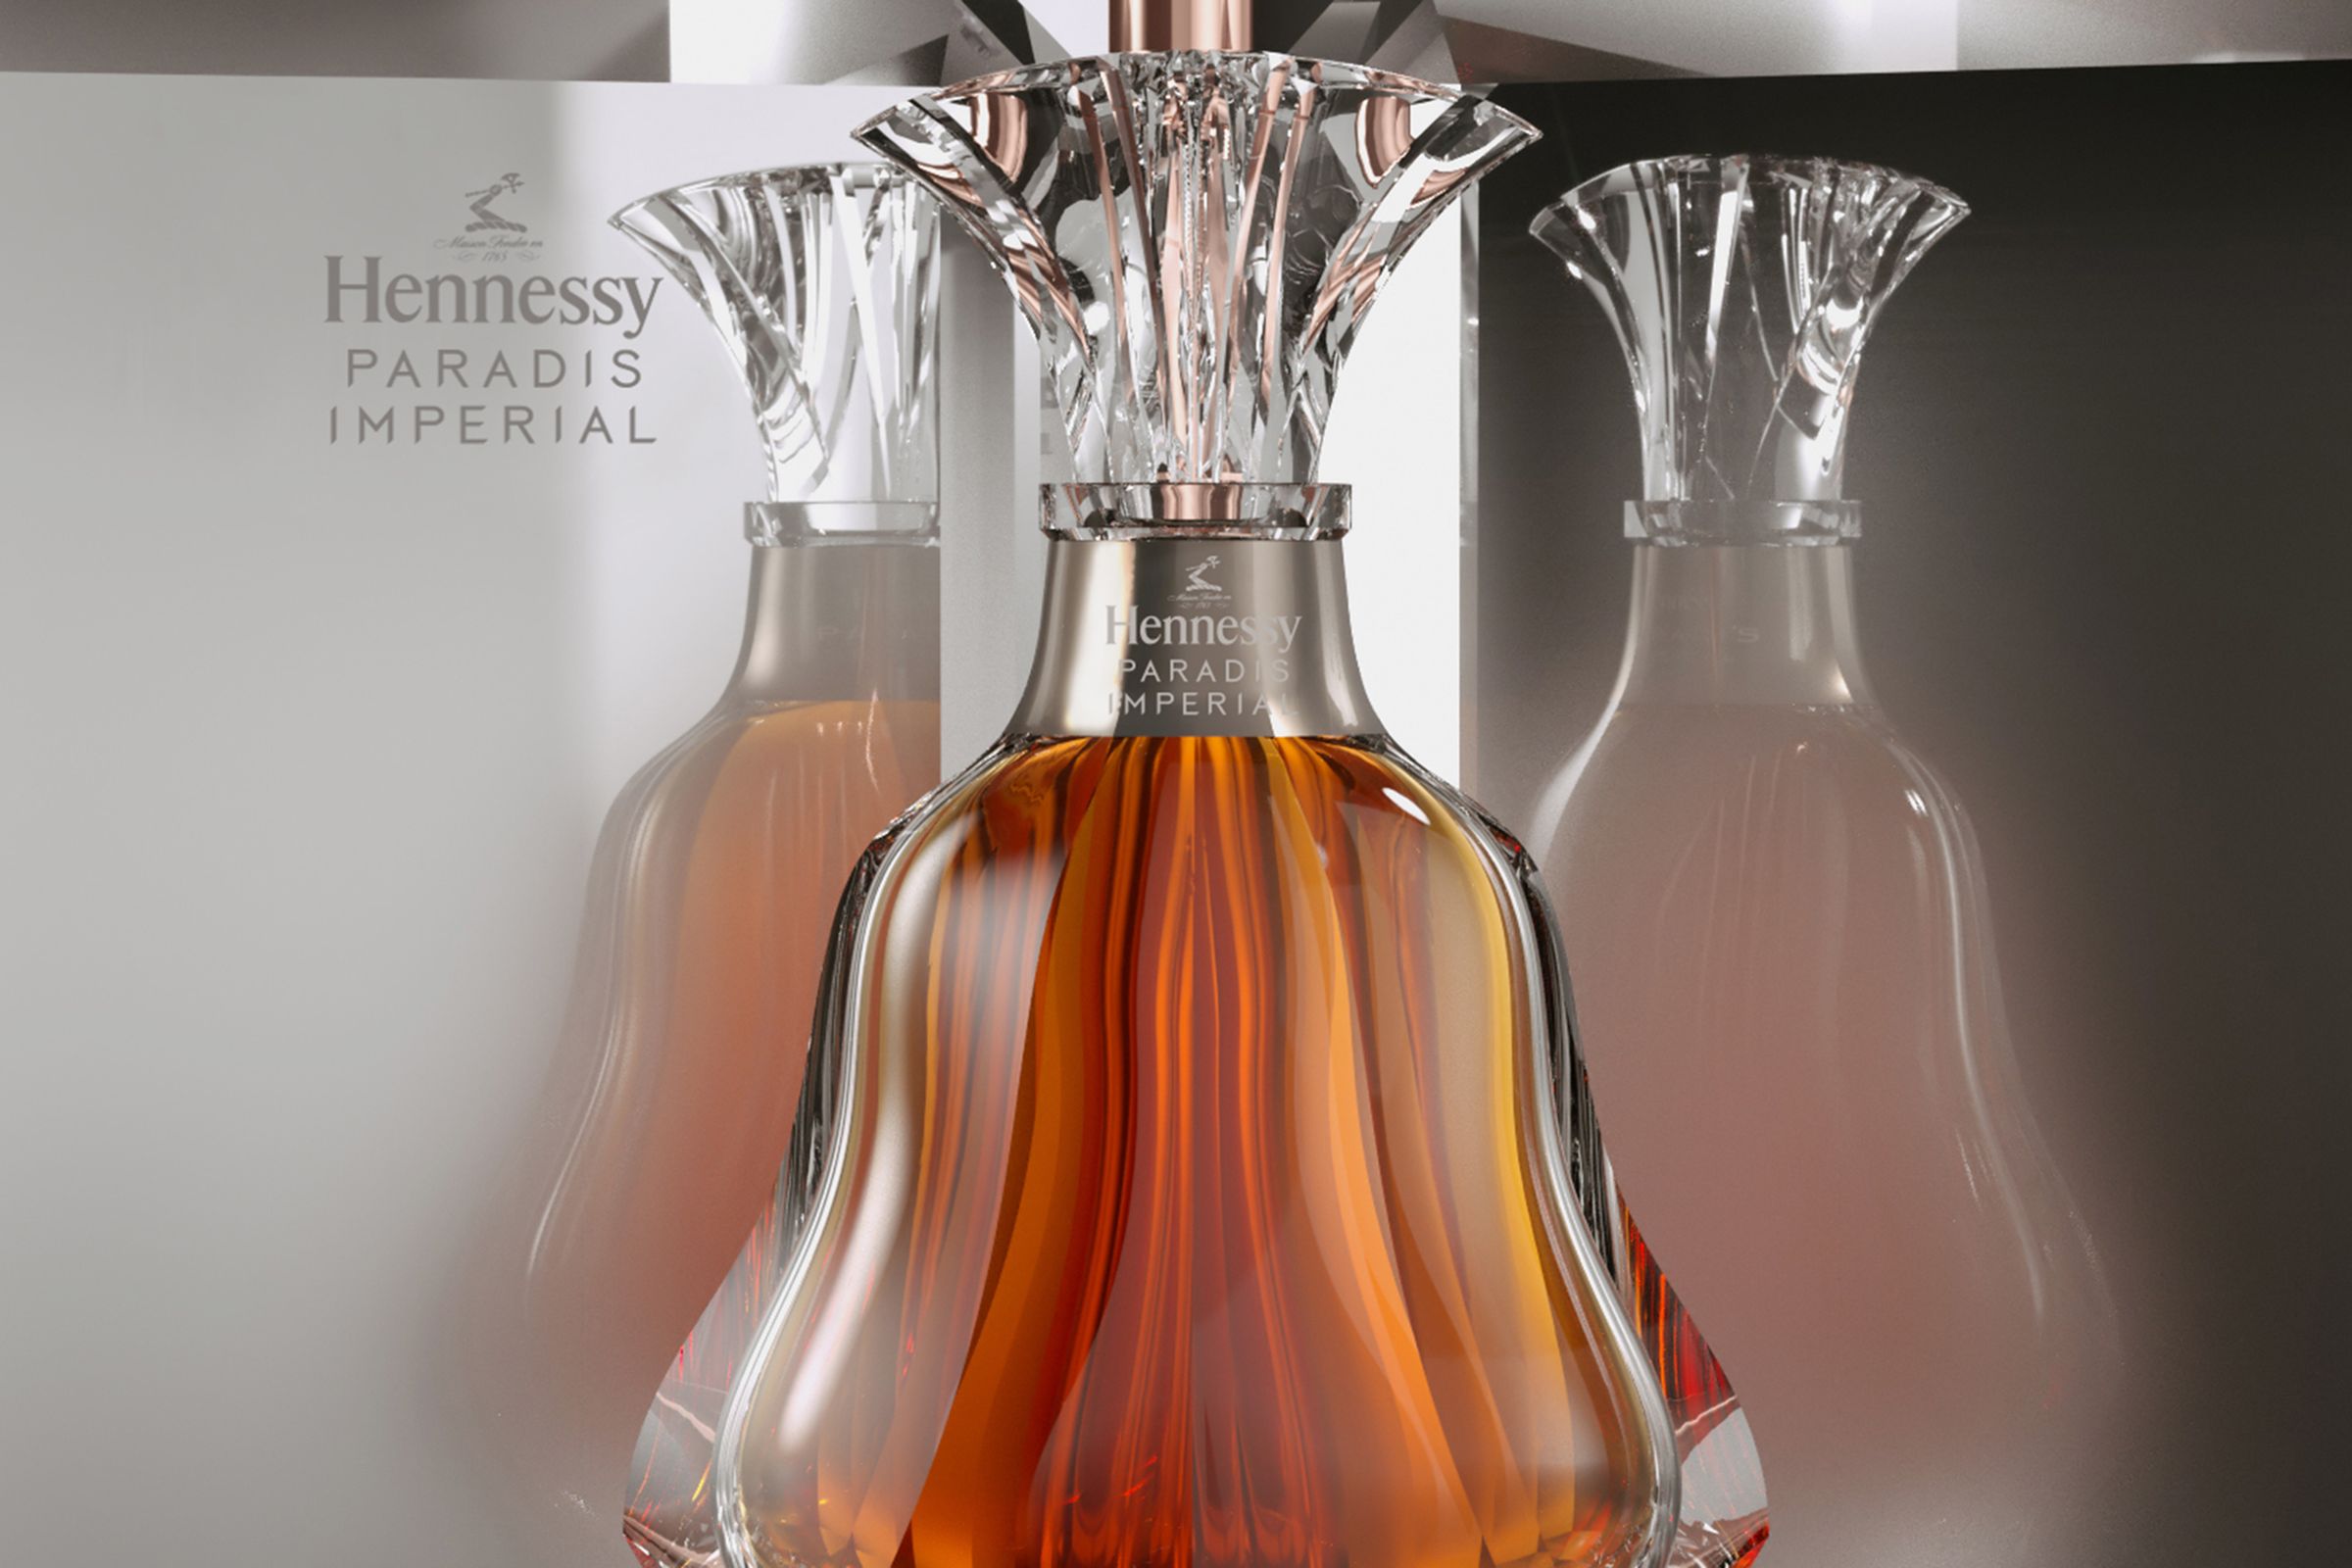 Hennessy Paradis Impérial logo design applied to bottle and box